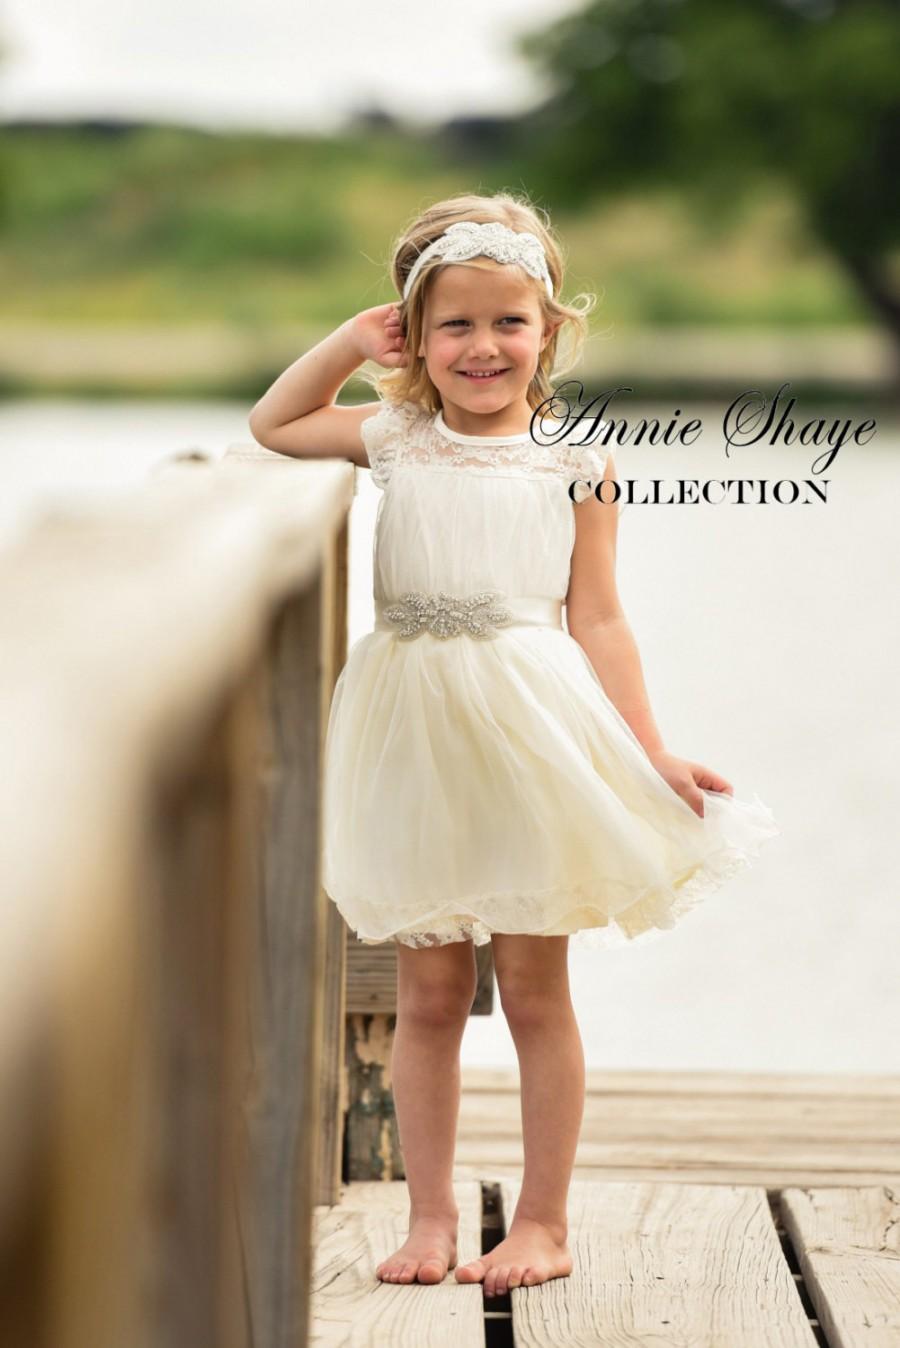 Hochzeit - Olivia Dress by Annie Shaye - flower girl dress ivory, lace toddler dress made for girls ages 9-12M,1t,2t,3t,4t,5,6,7,8, 9,10,11,12,13,14